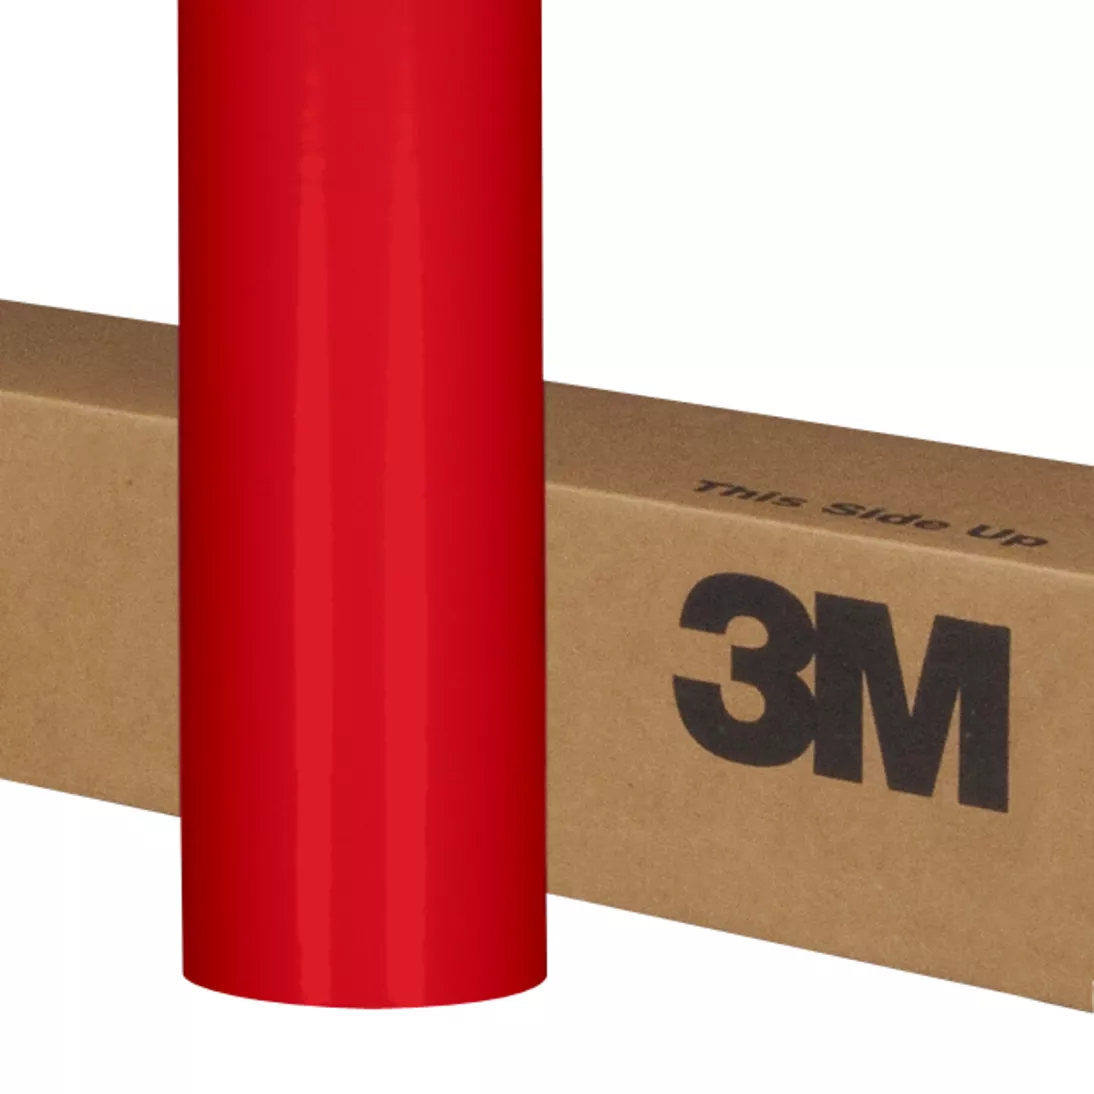 3M™ Scotchcal™ Translucent Graphic Film 3630-43, Light Tomato Red, 60 in
x 50 yd